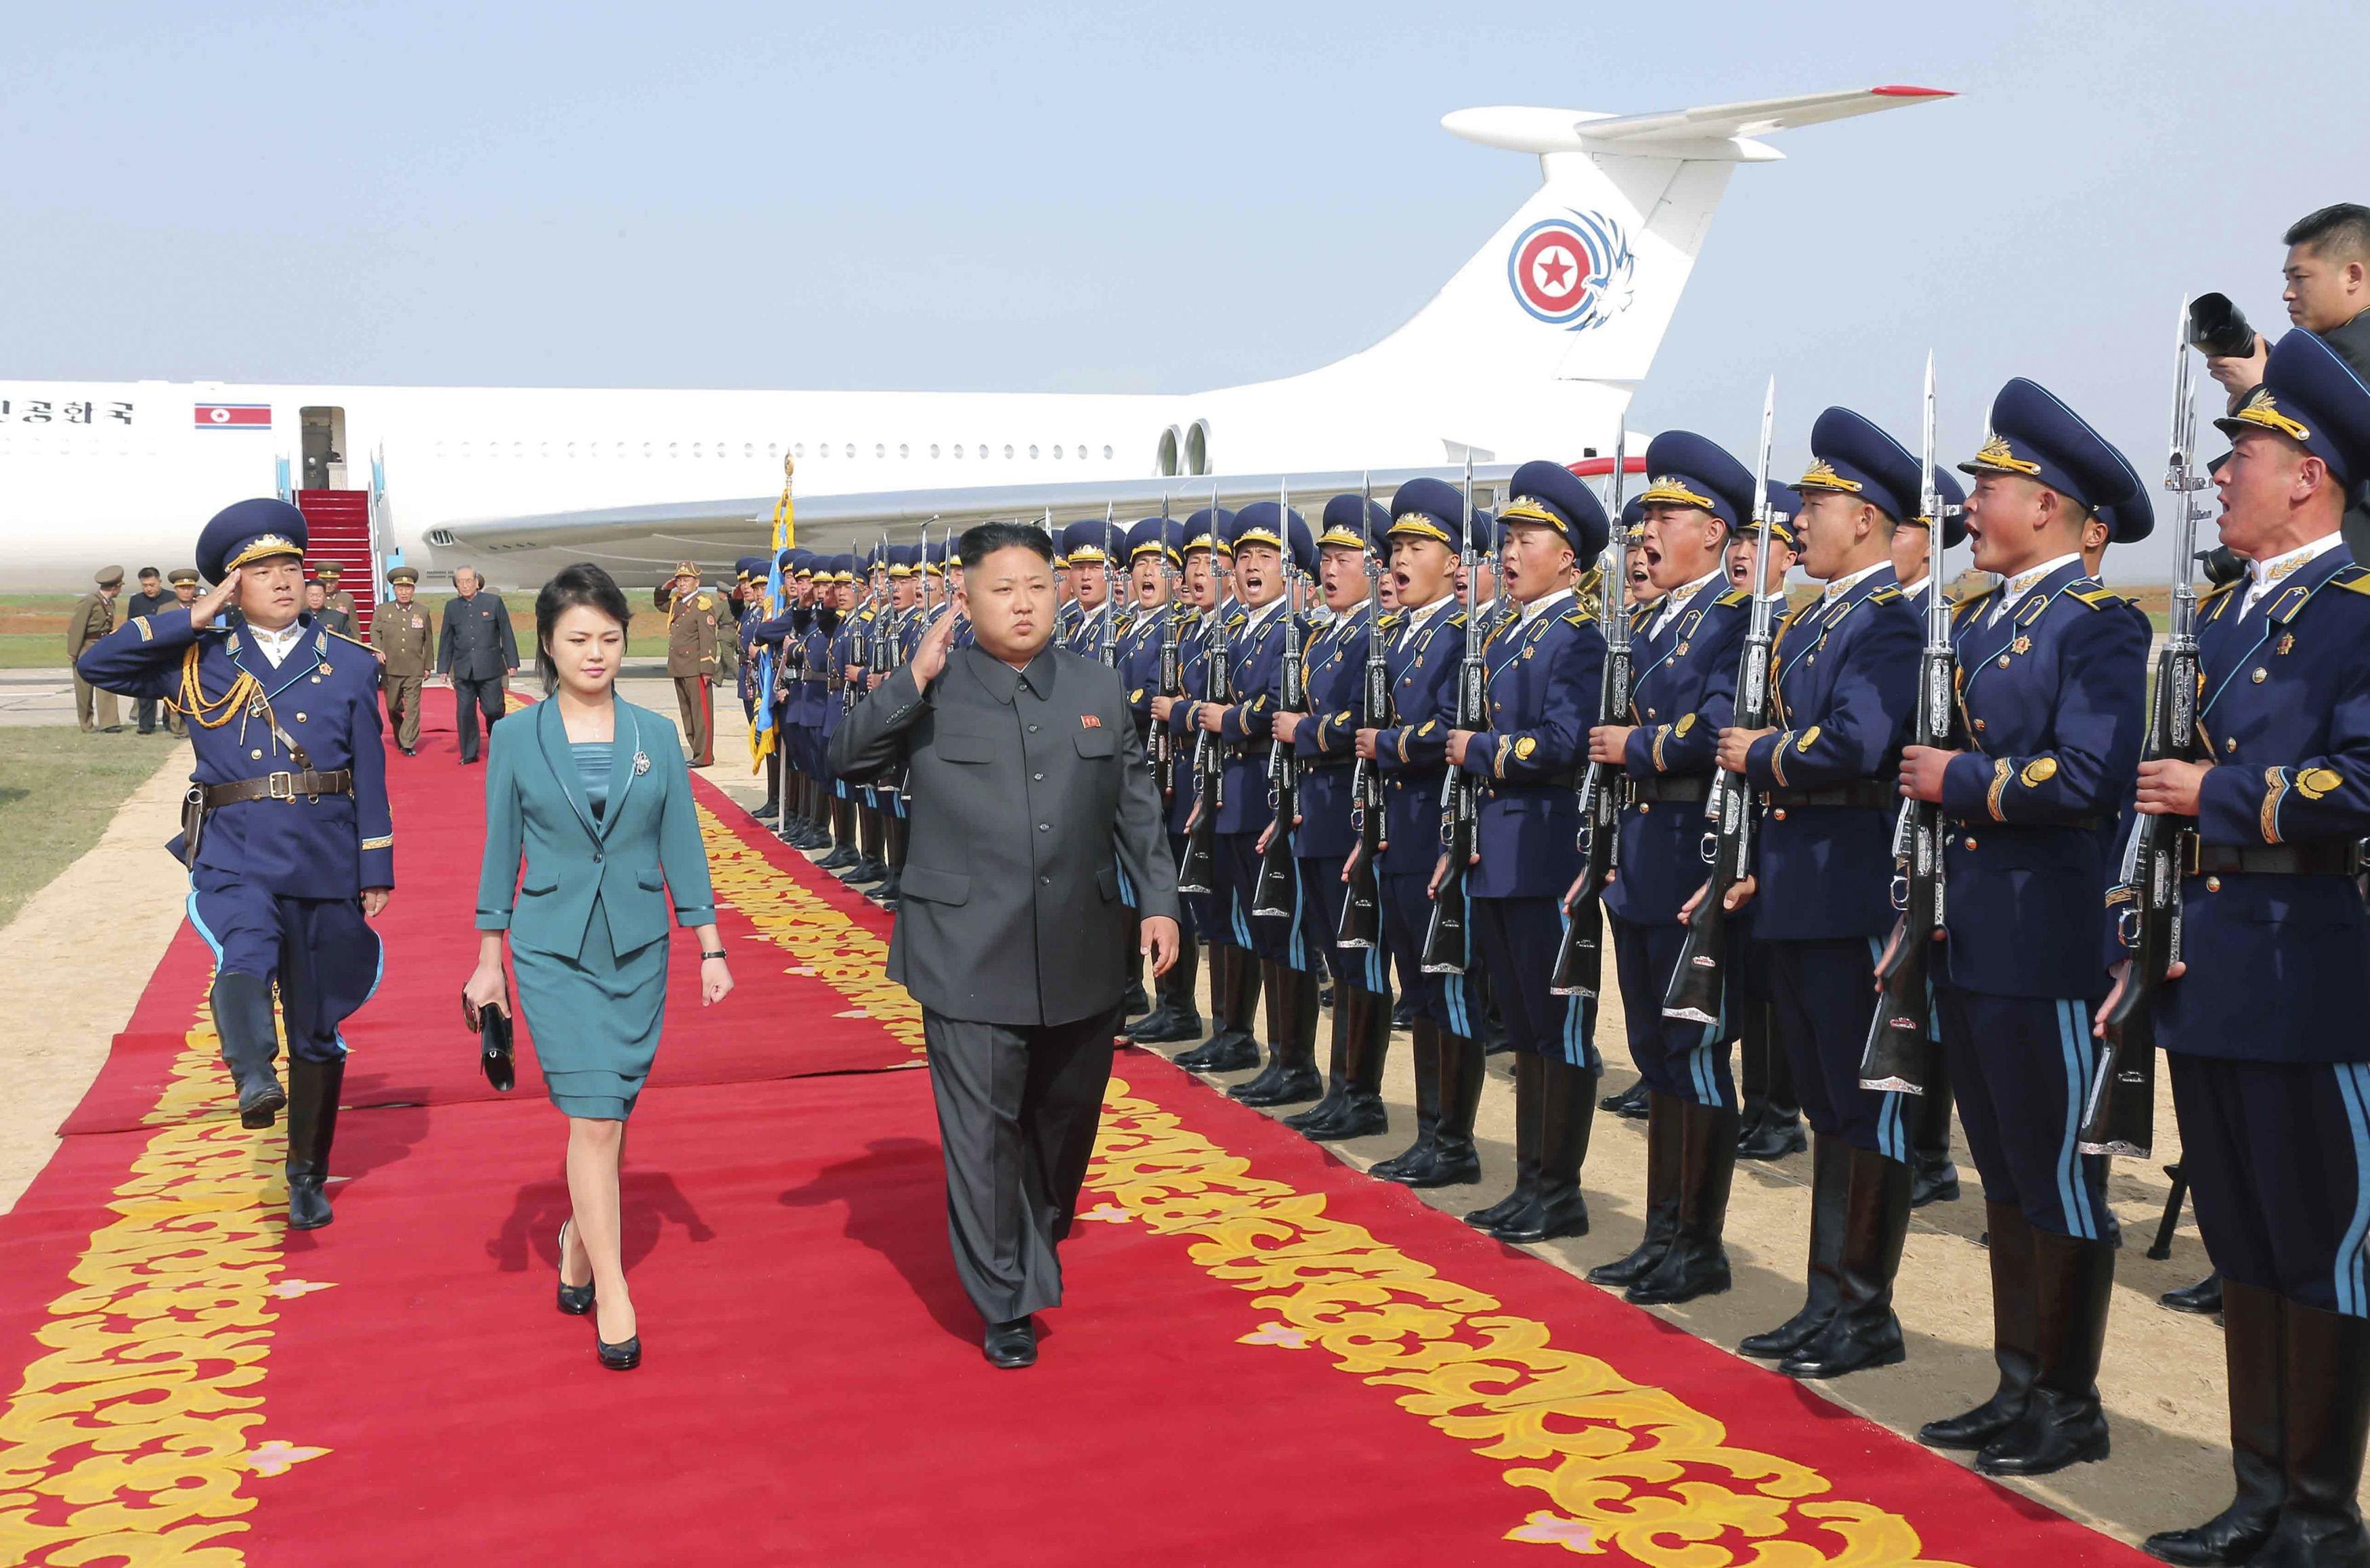 North Korean leader Kim Jong Un salutes as he and his wife Ri Sol Ju walk past the guard of honour upon arriving for the 2014 Combat Flight Contest of the Korean People's Air Force in Pyongyang, in a photo released on May 10, 2014.